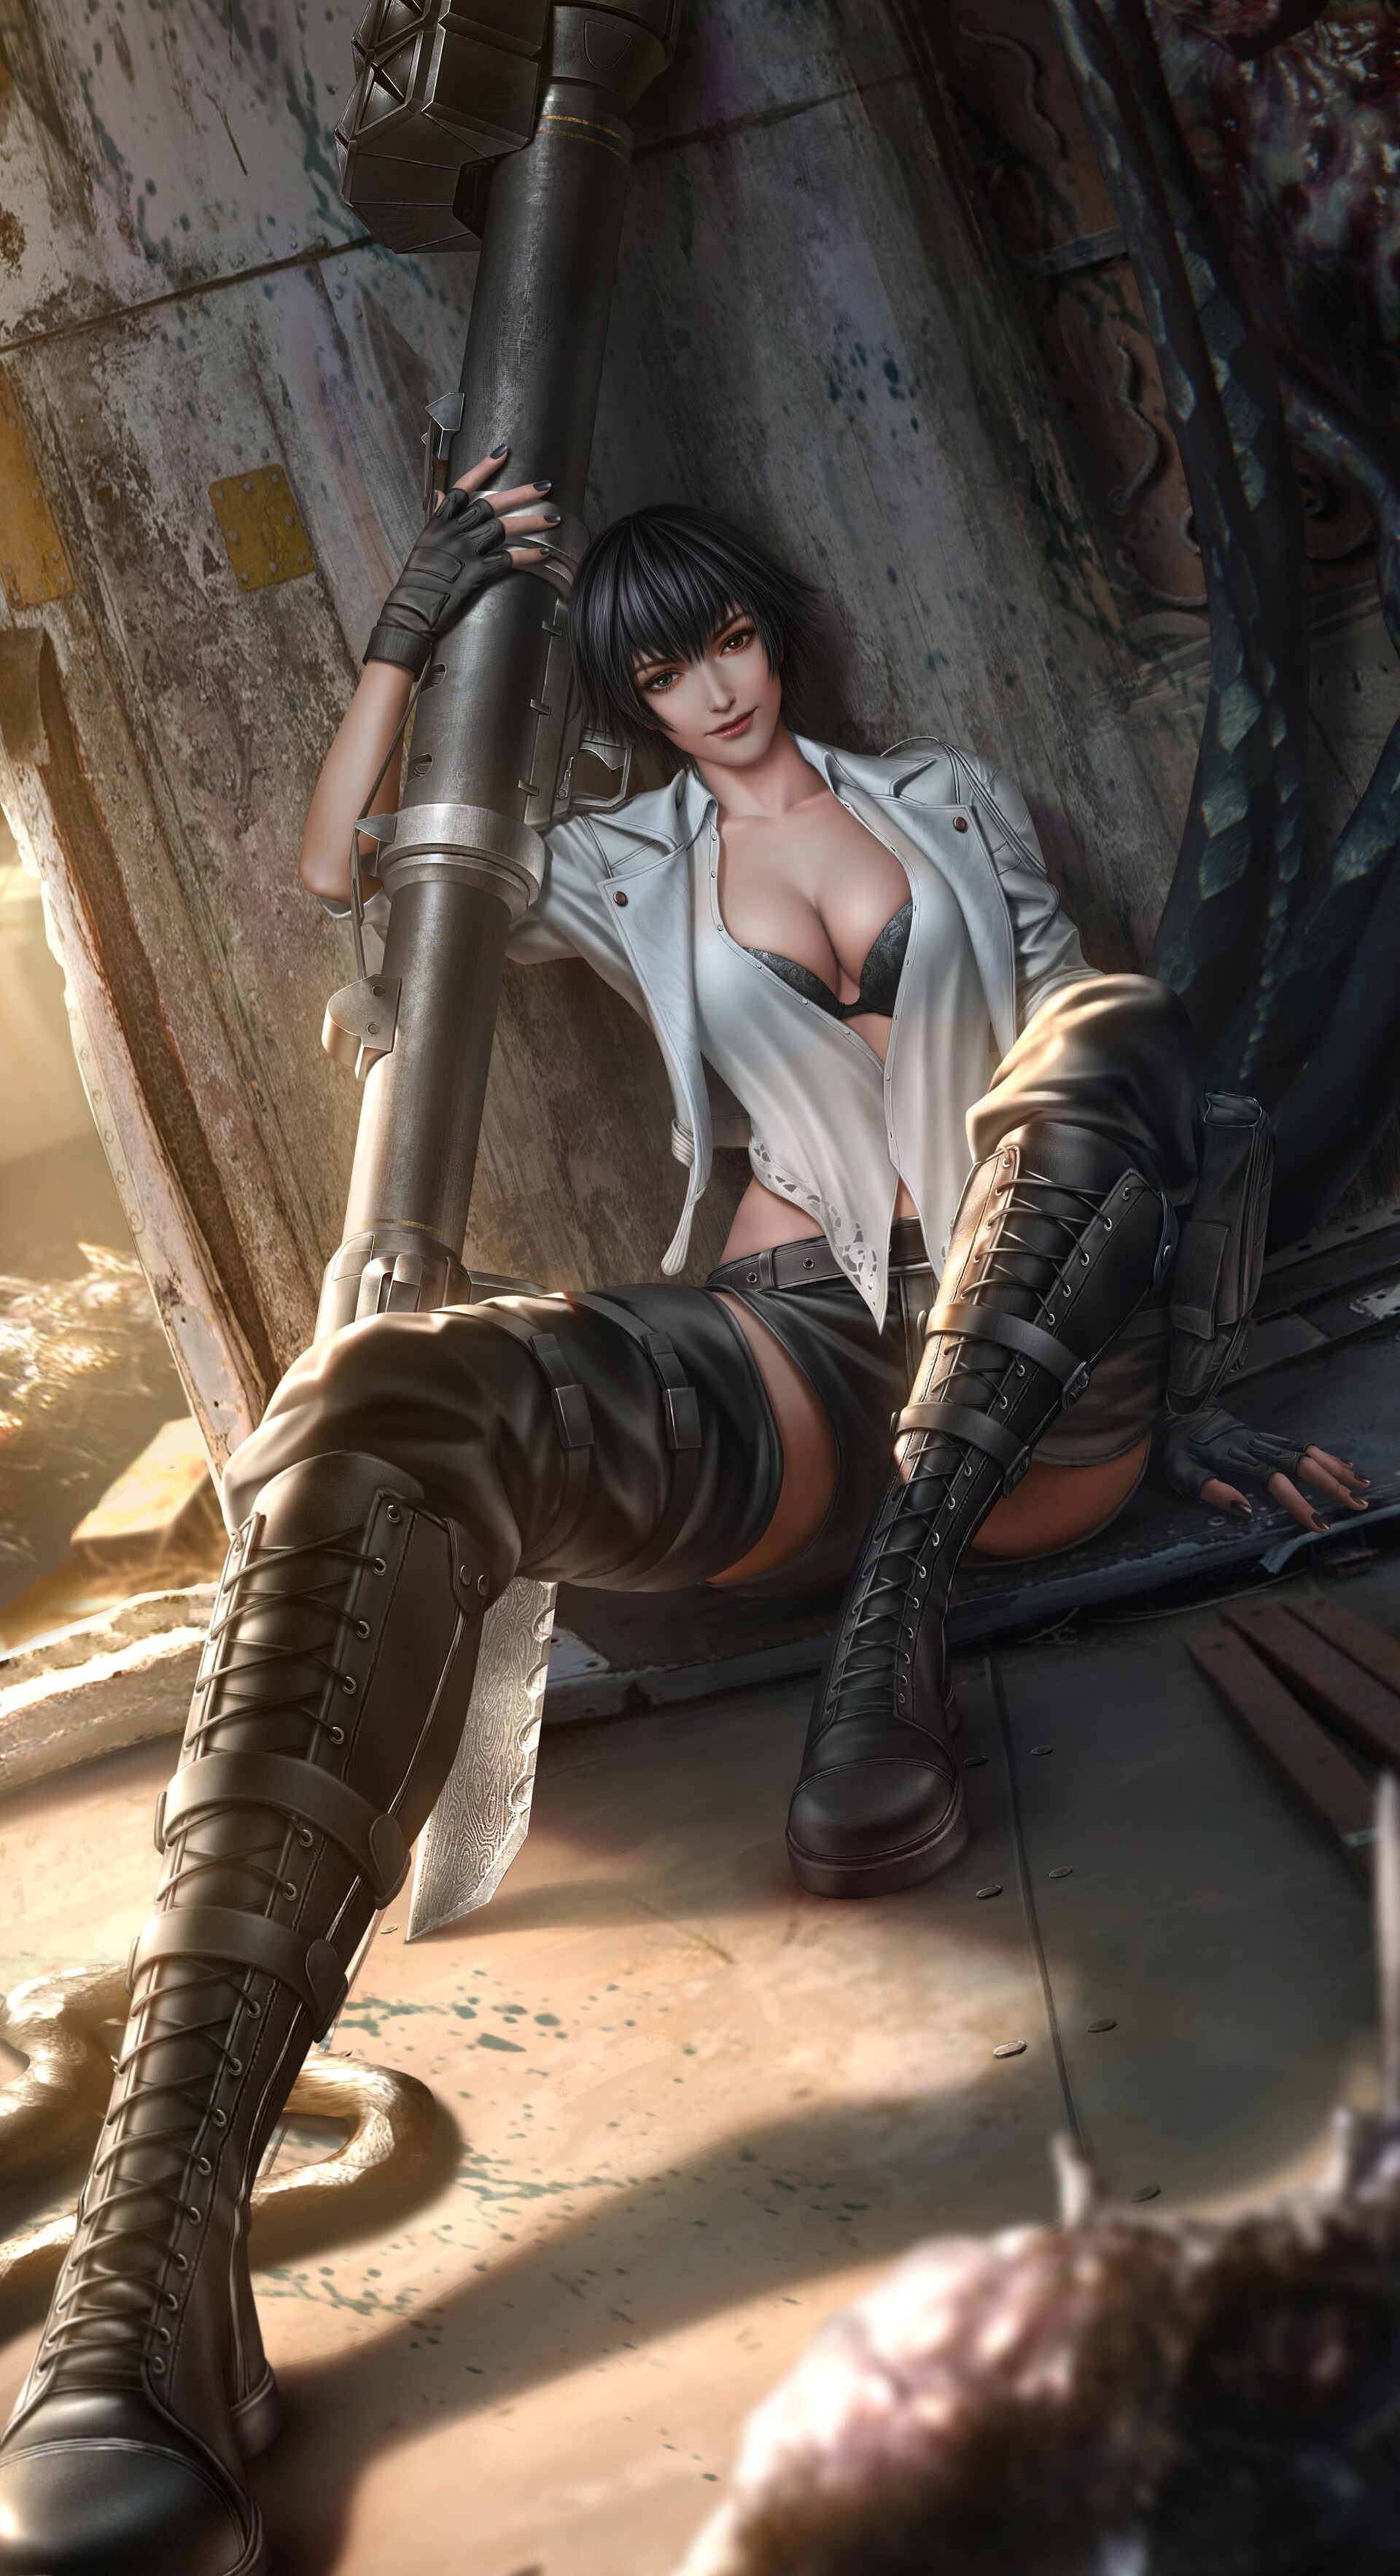 General 1920x3533 artwork women Asian rocket launchers cleavage boobs dark hair boots sitting legs Devil May Cry Lady (Devil May Cry) Cloud D